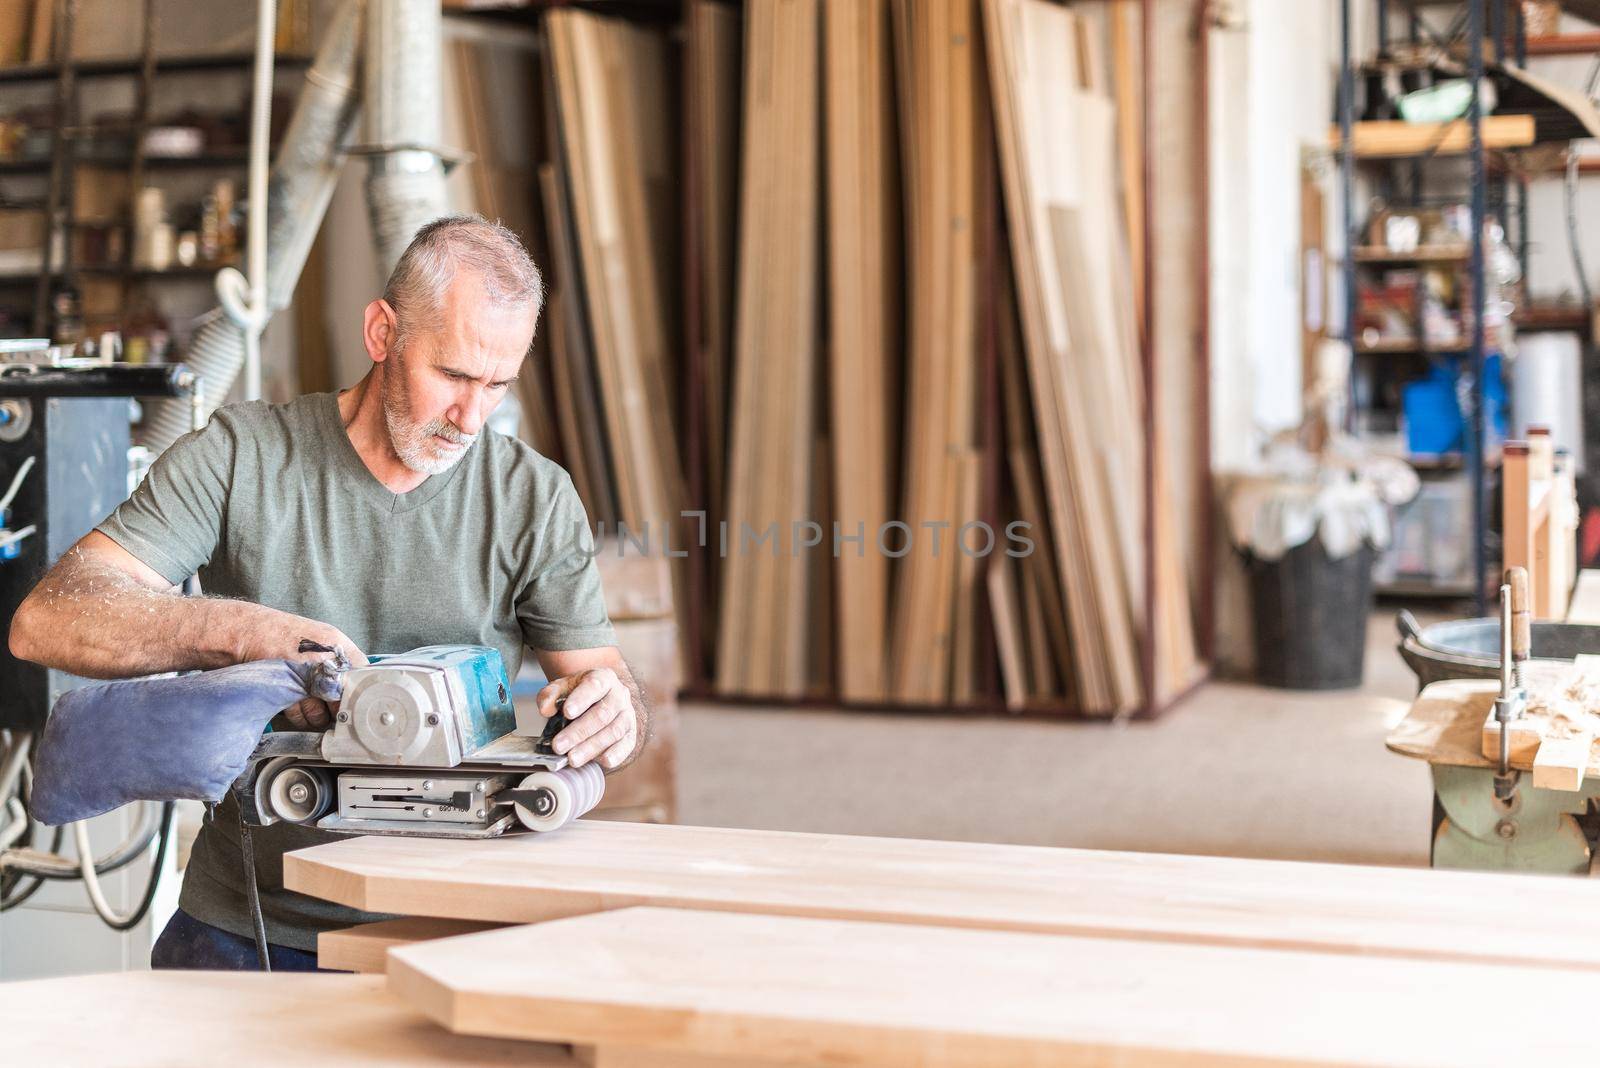 Man standing with a hand sander polishing a wooden board, horizontal view